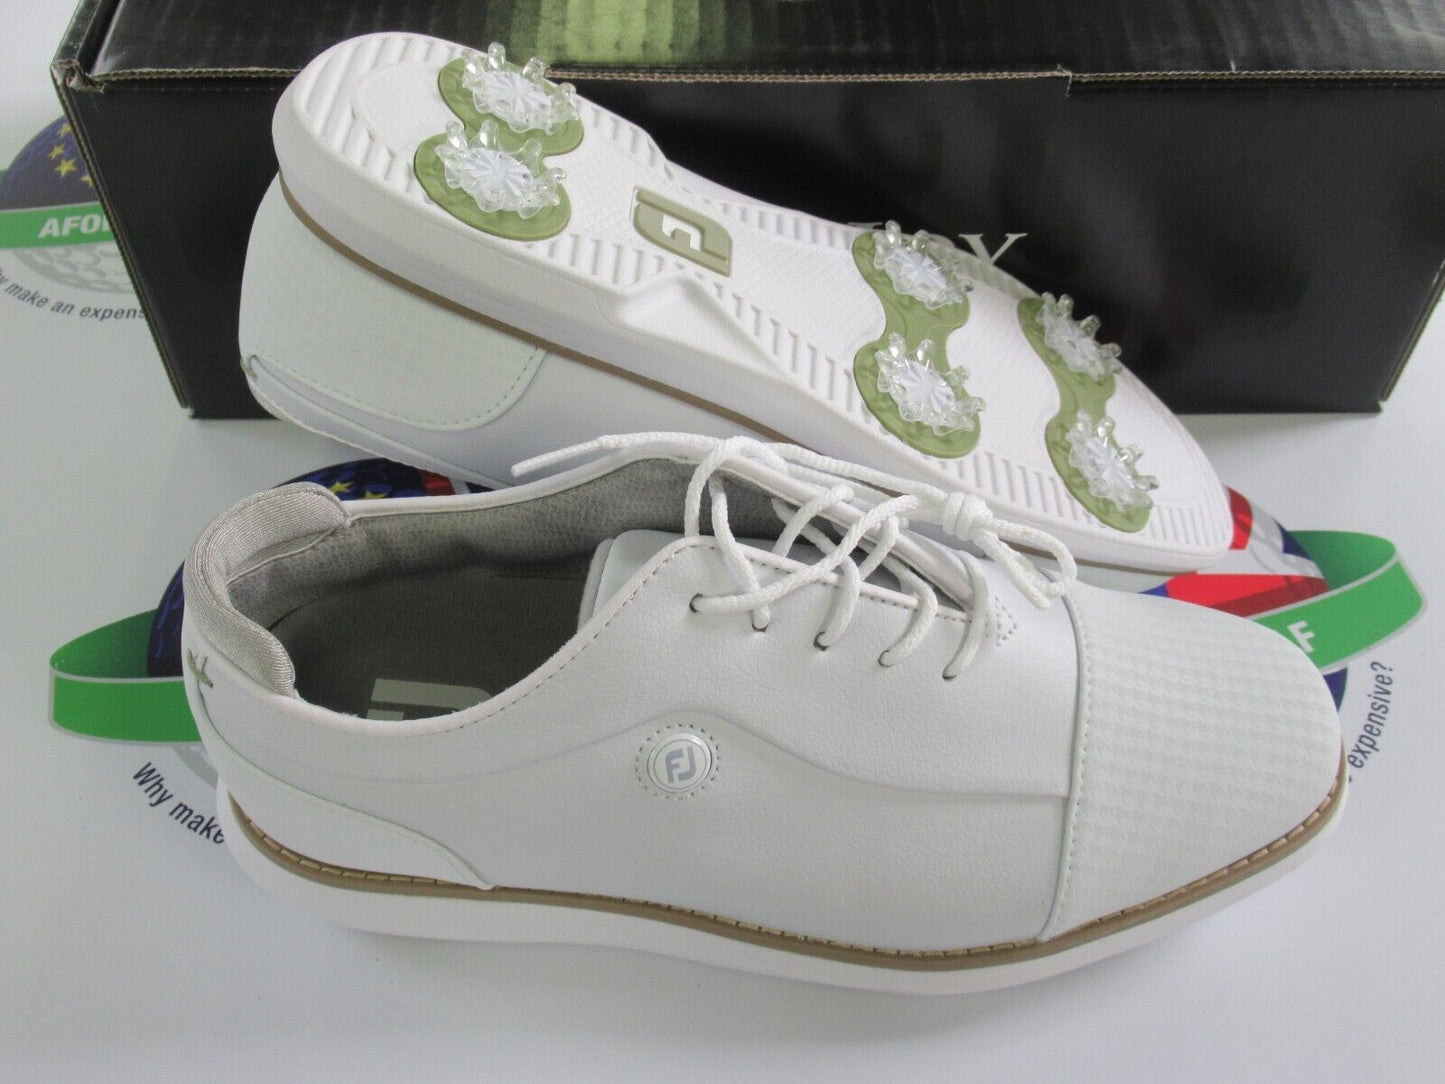 footjoy fj traditions womens golf shoes 97914k white uk size 6 wide/large